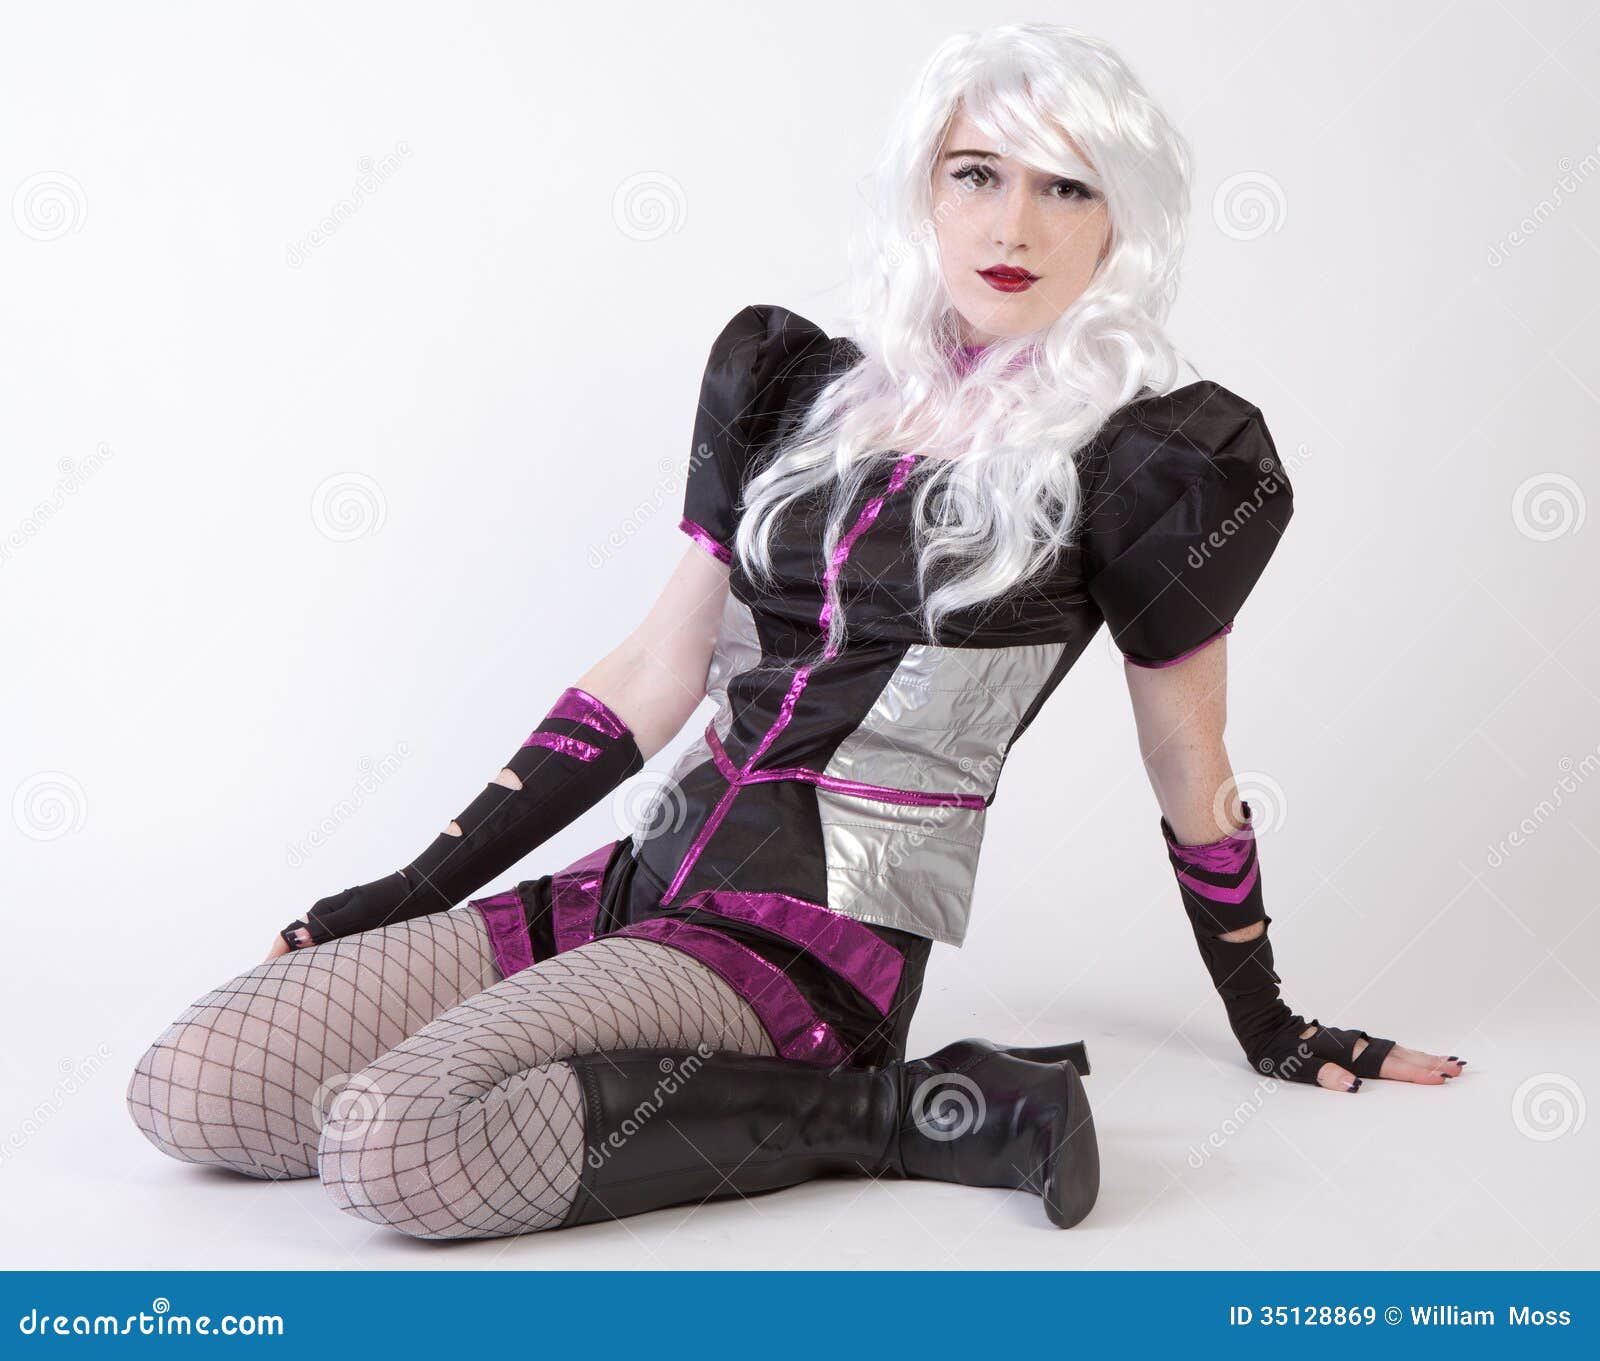 11,139 Woman Futuristic Costume Images, Stock Photos, 3D objects, & Vectors